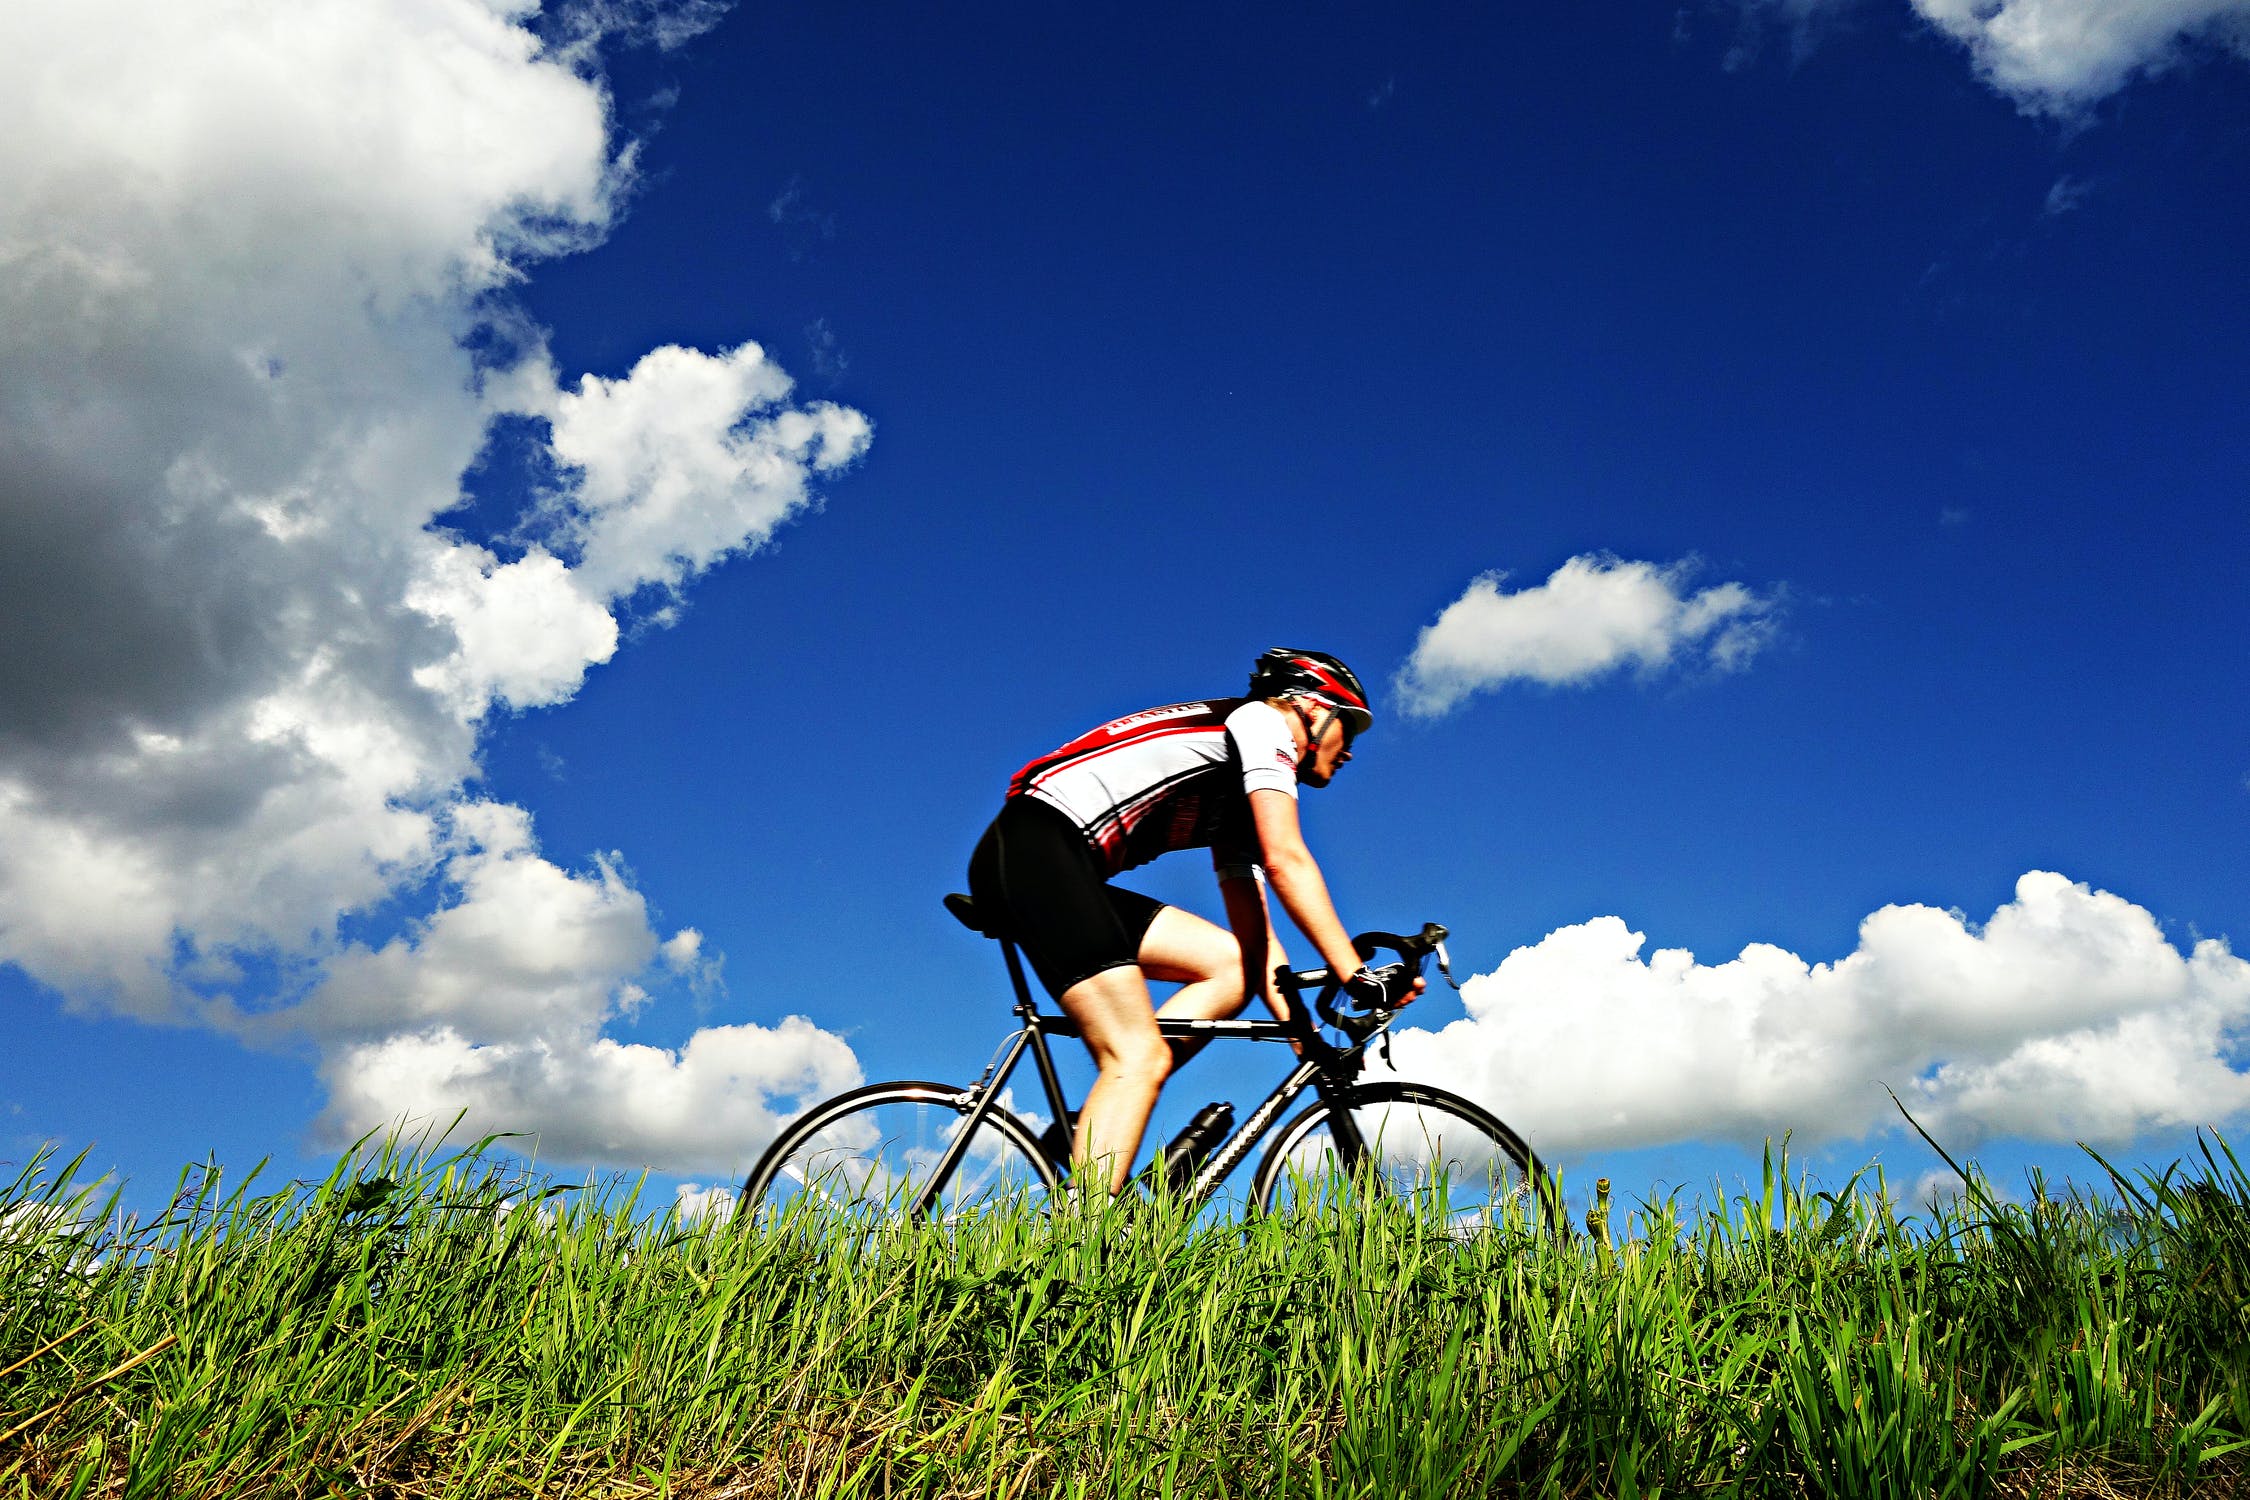 Blue sky with white clouds. A cyclist is riding on green grass